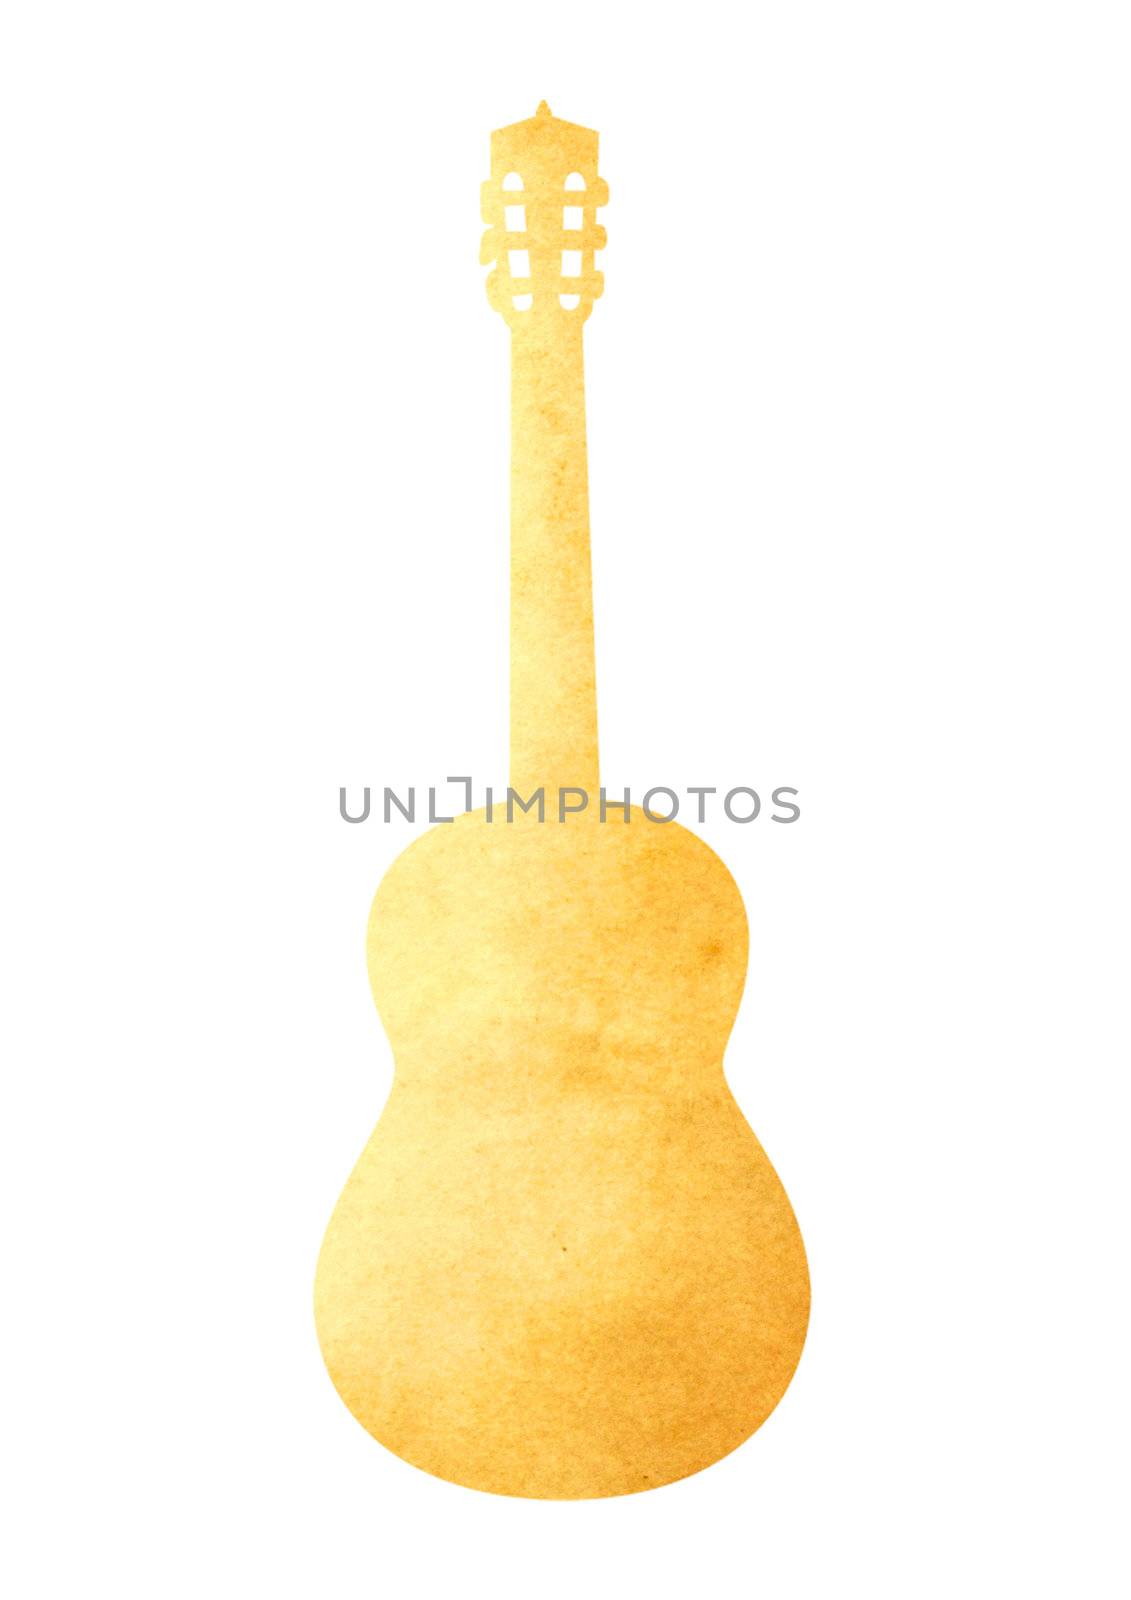 Grunge image of guitar from old paper isolated by nuchylee